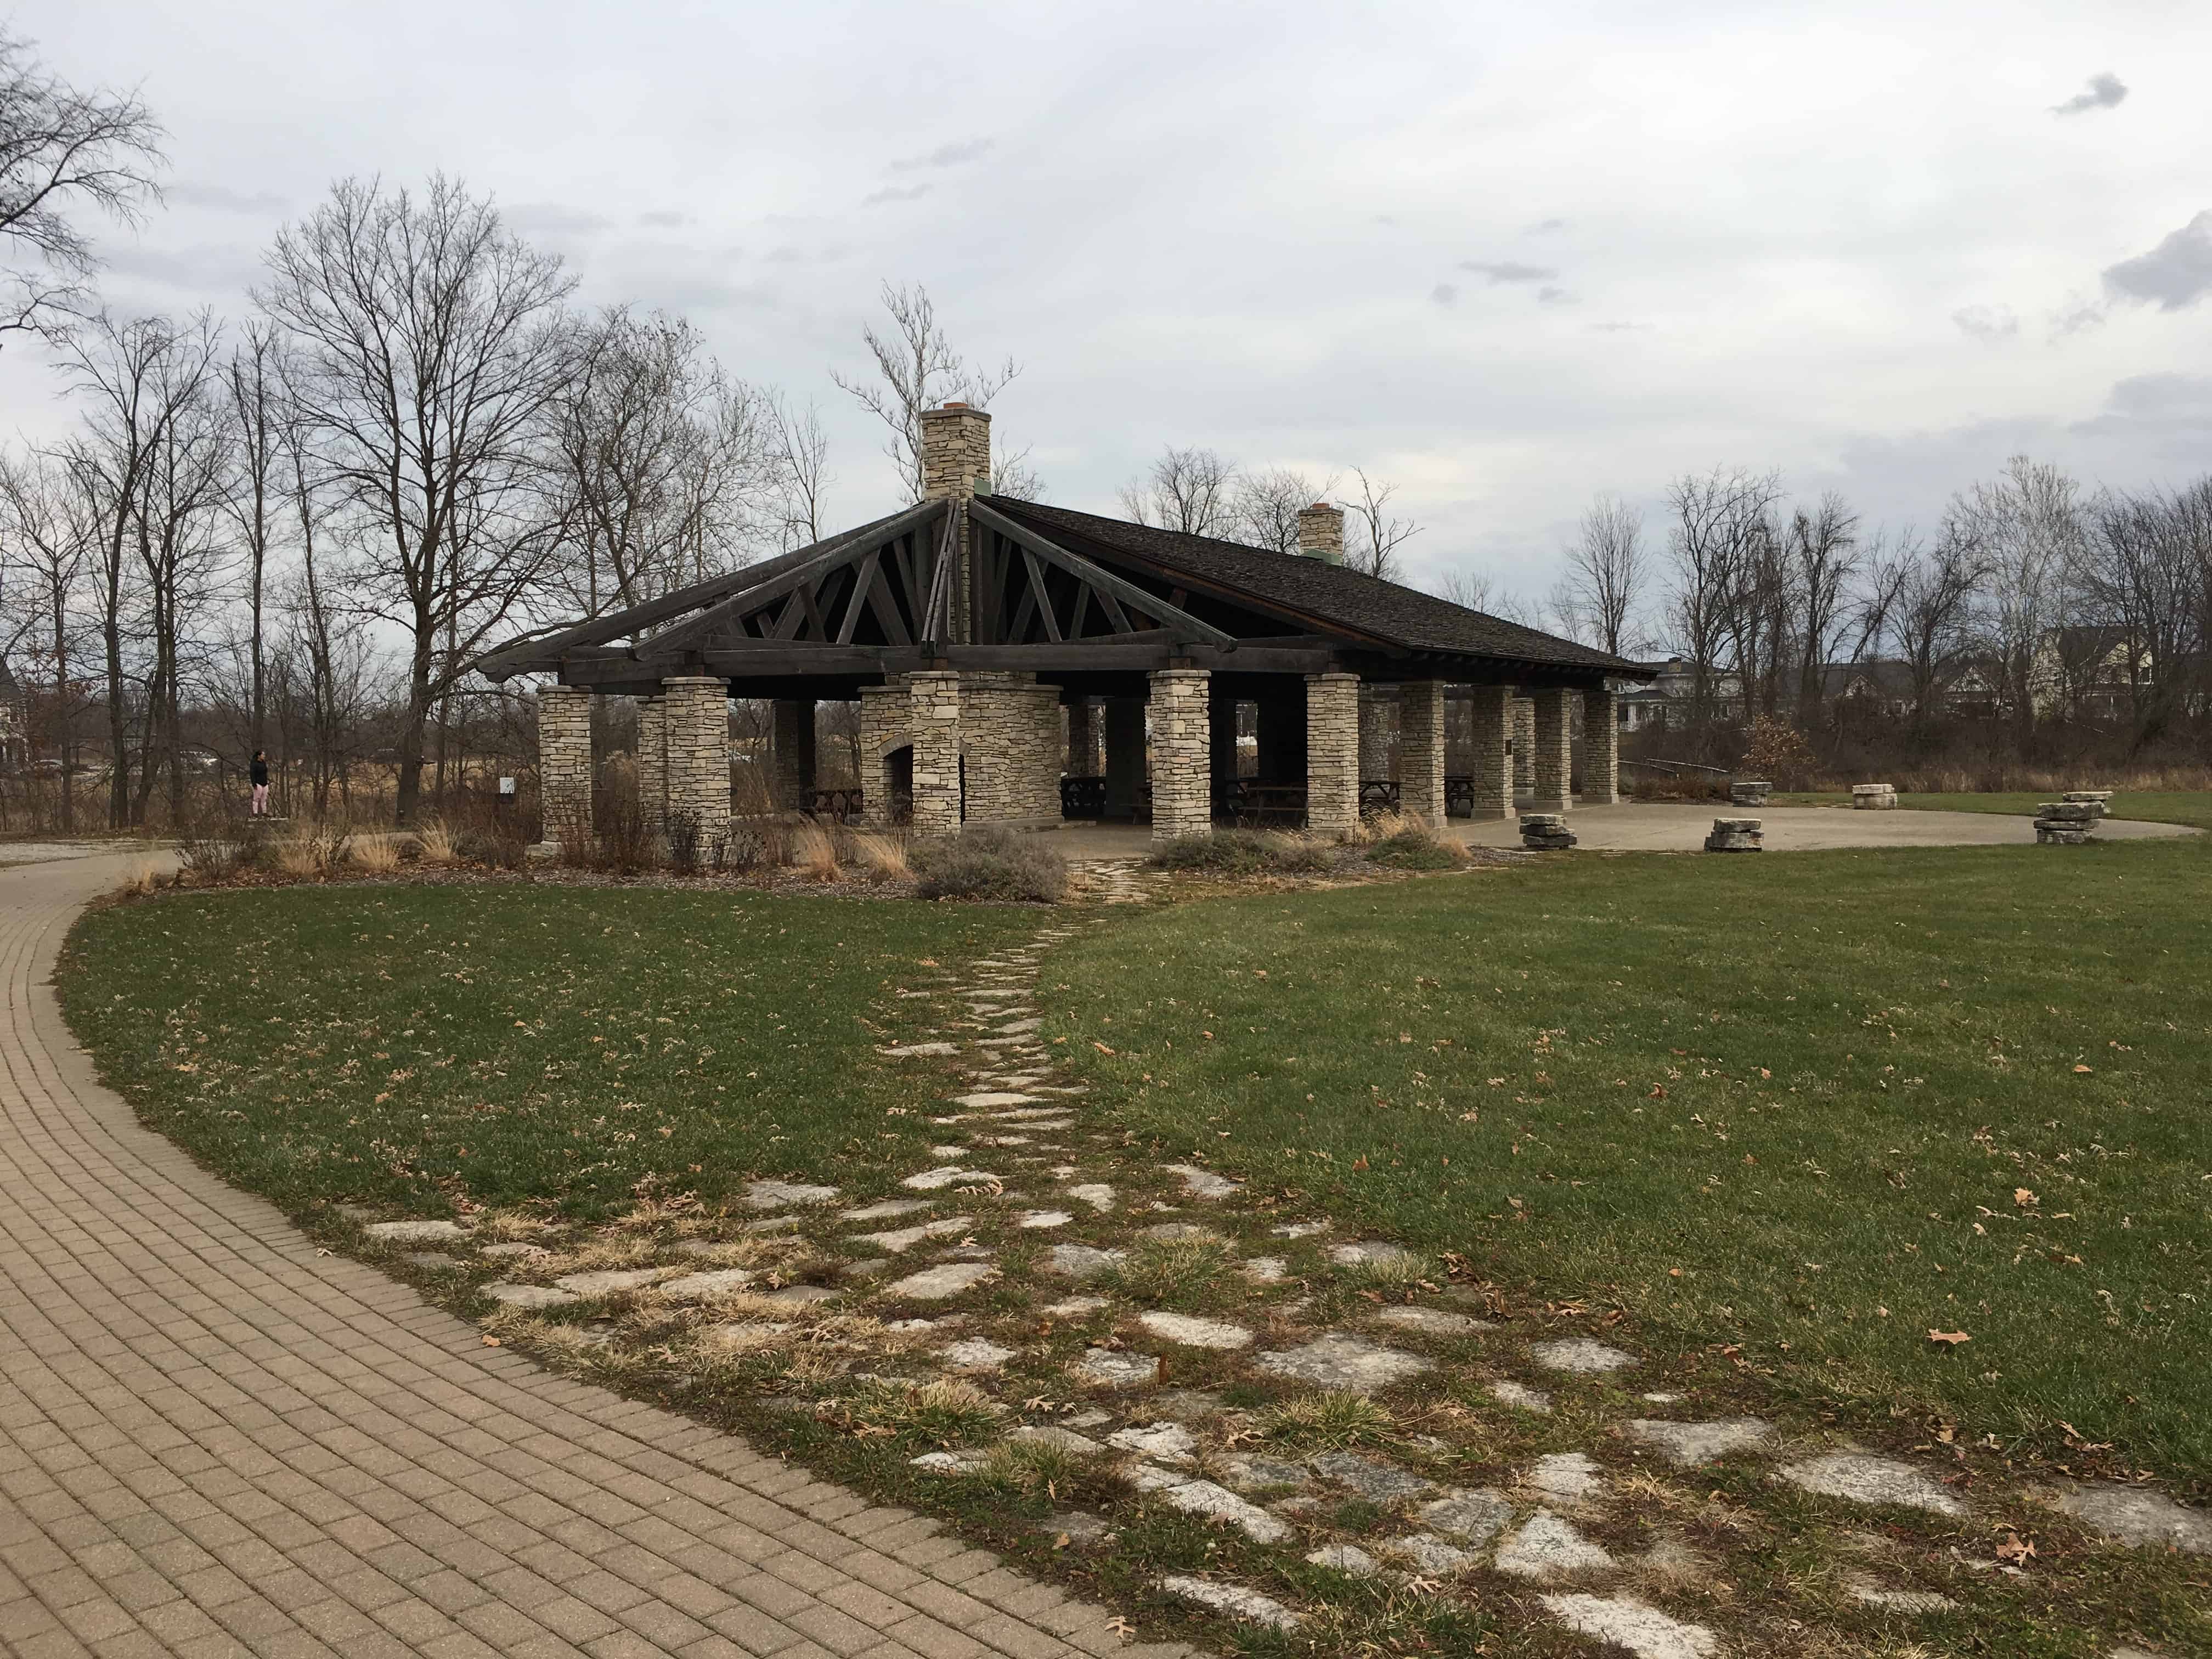 Pavilion at Coffee Creek Preserve in Chesterton, Indiana